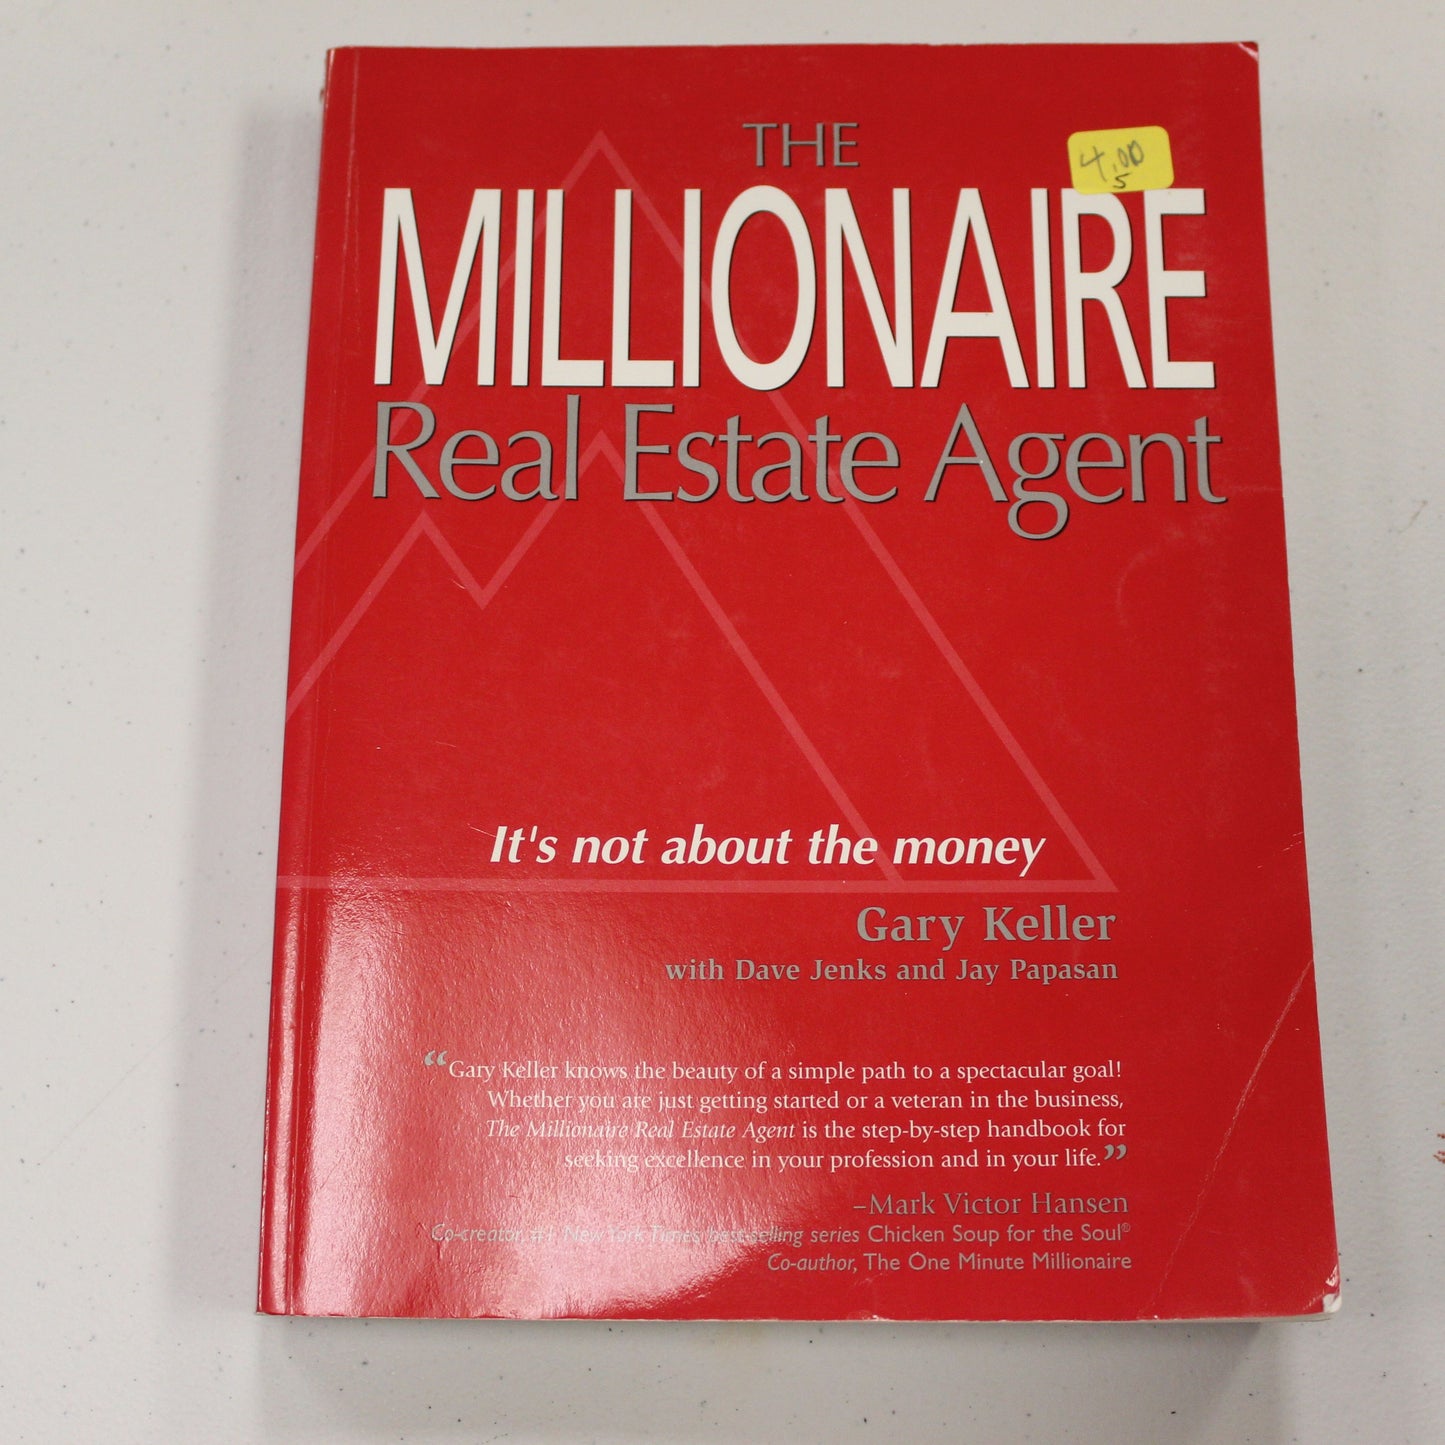 THE MILLIONAIRE REAL ESTATE AGENT